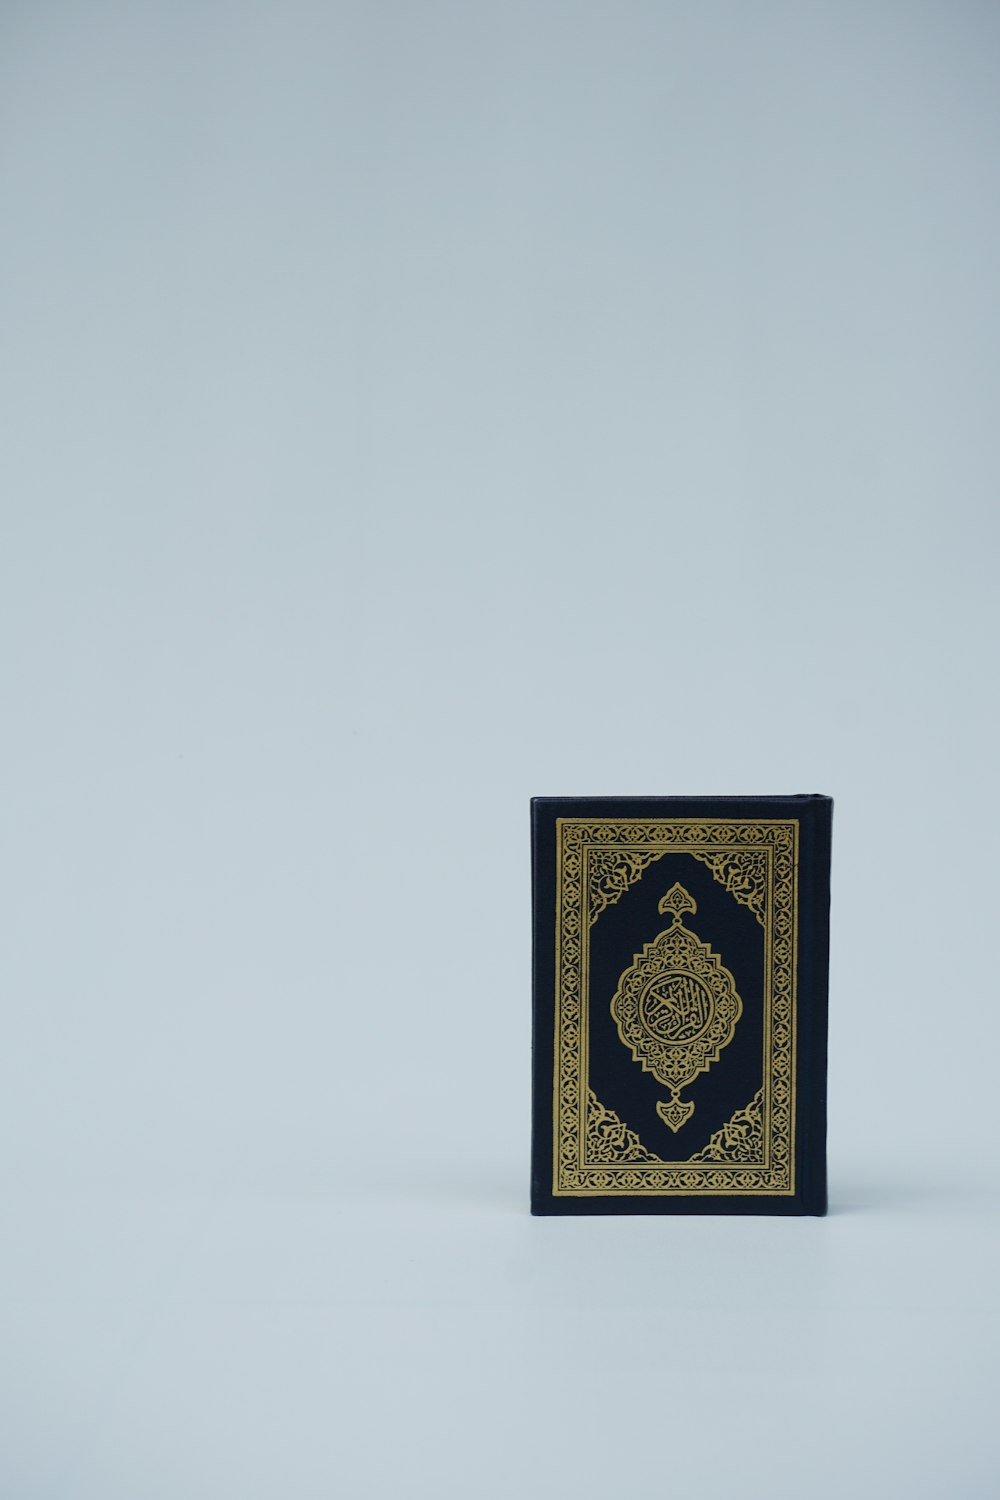 a black and gold book sitting on top of a table